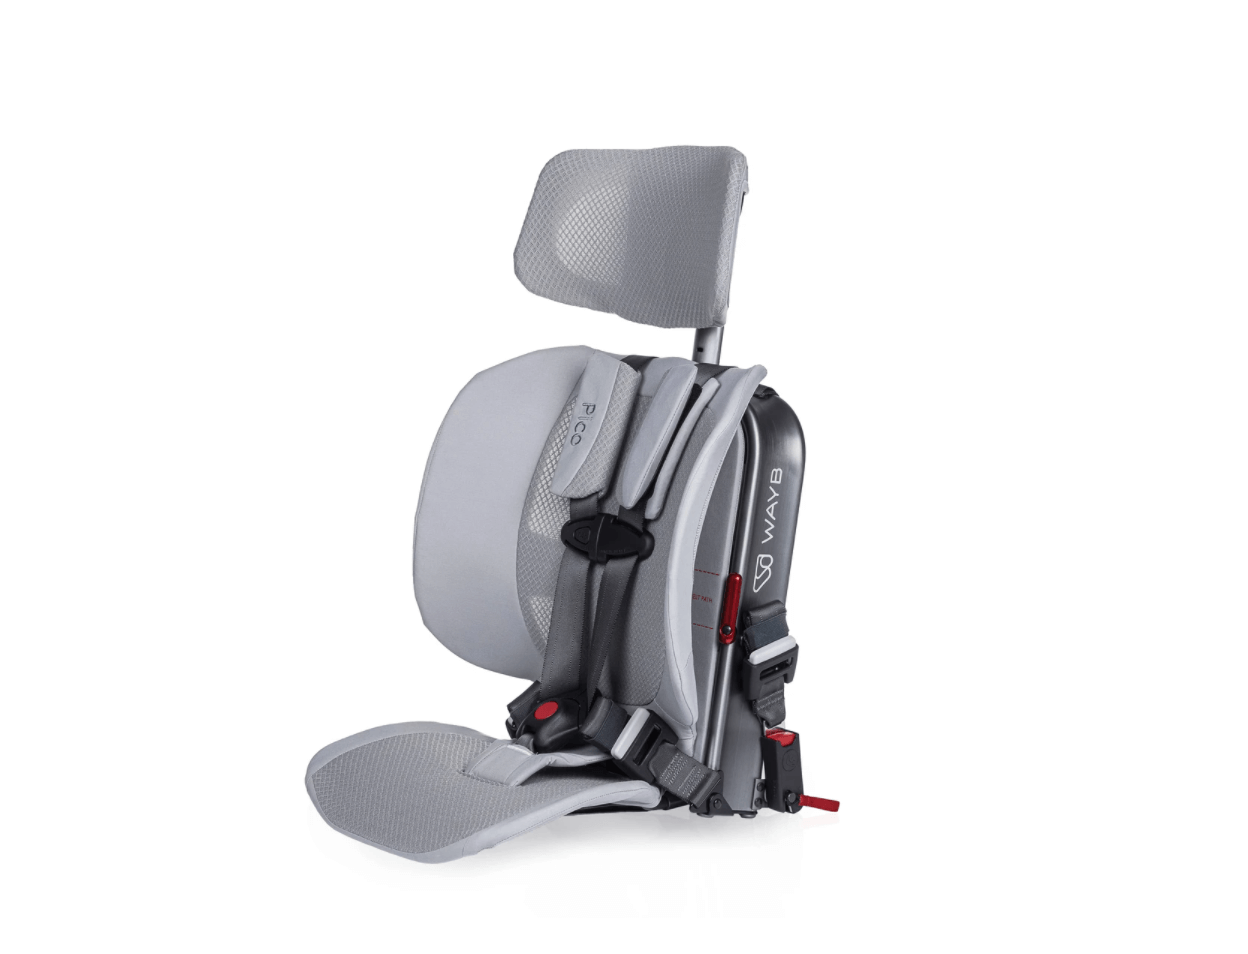 Best Convertible Travel Car Seat — The Pico by WayB